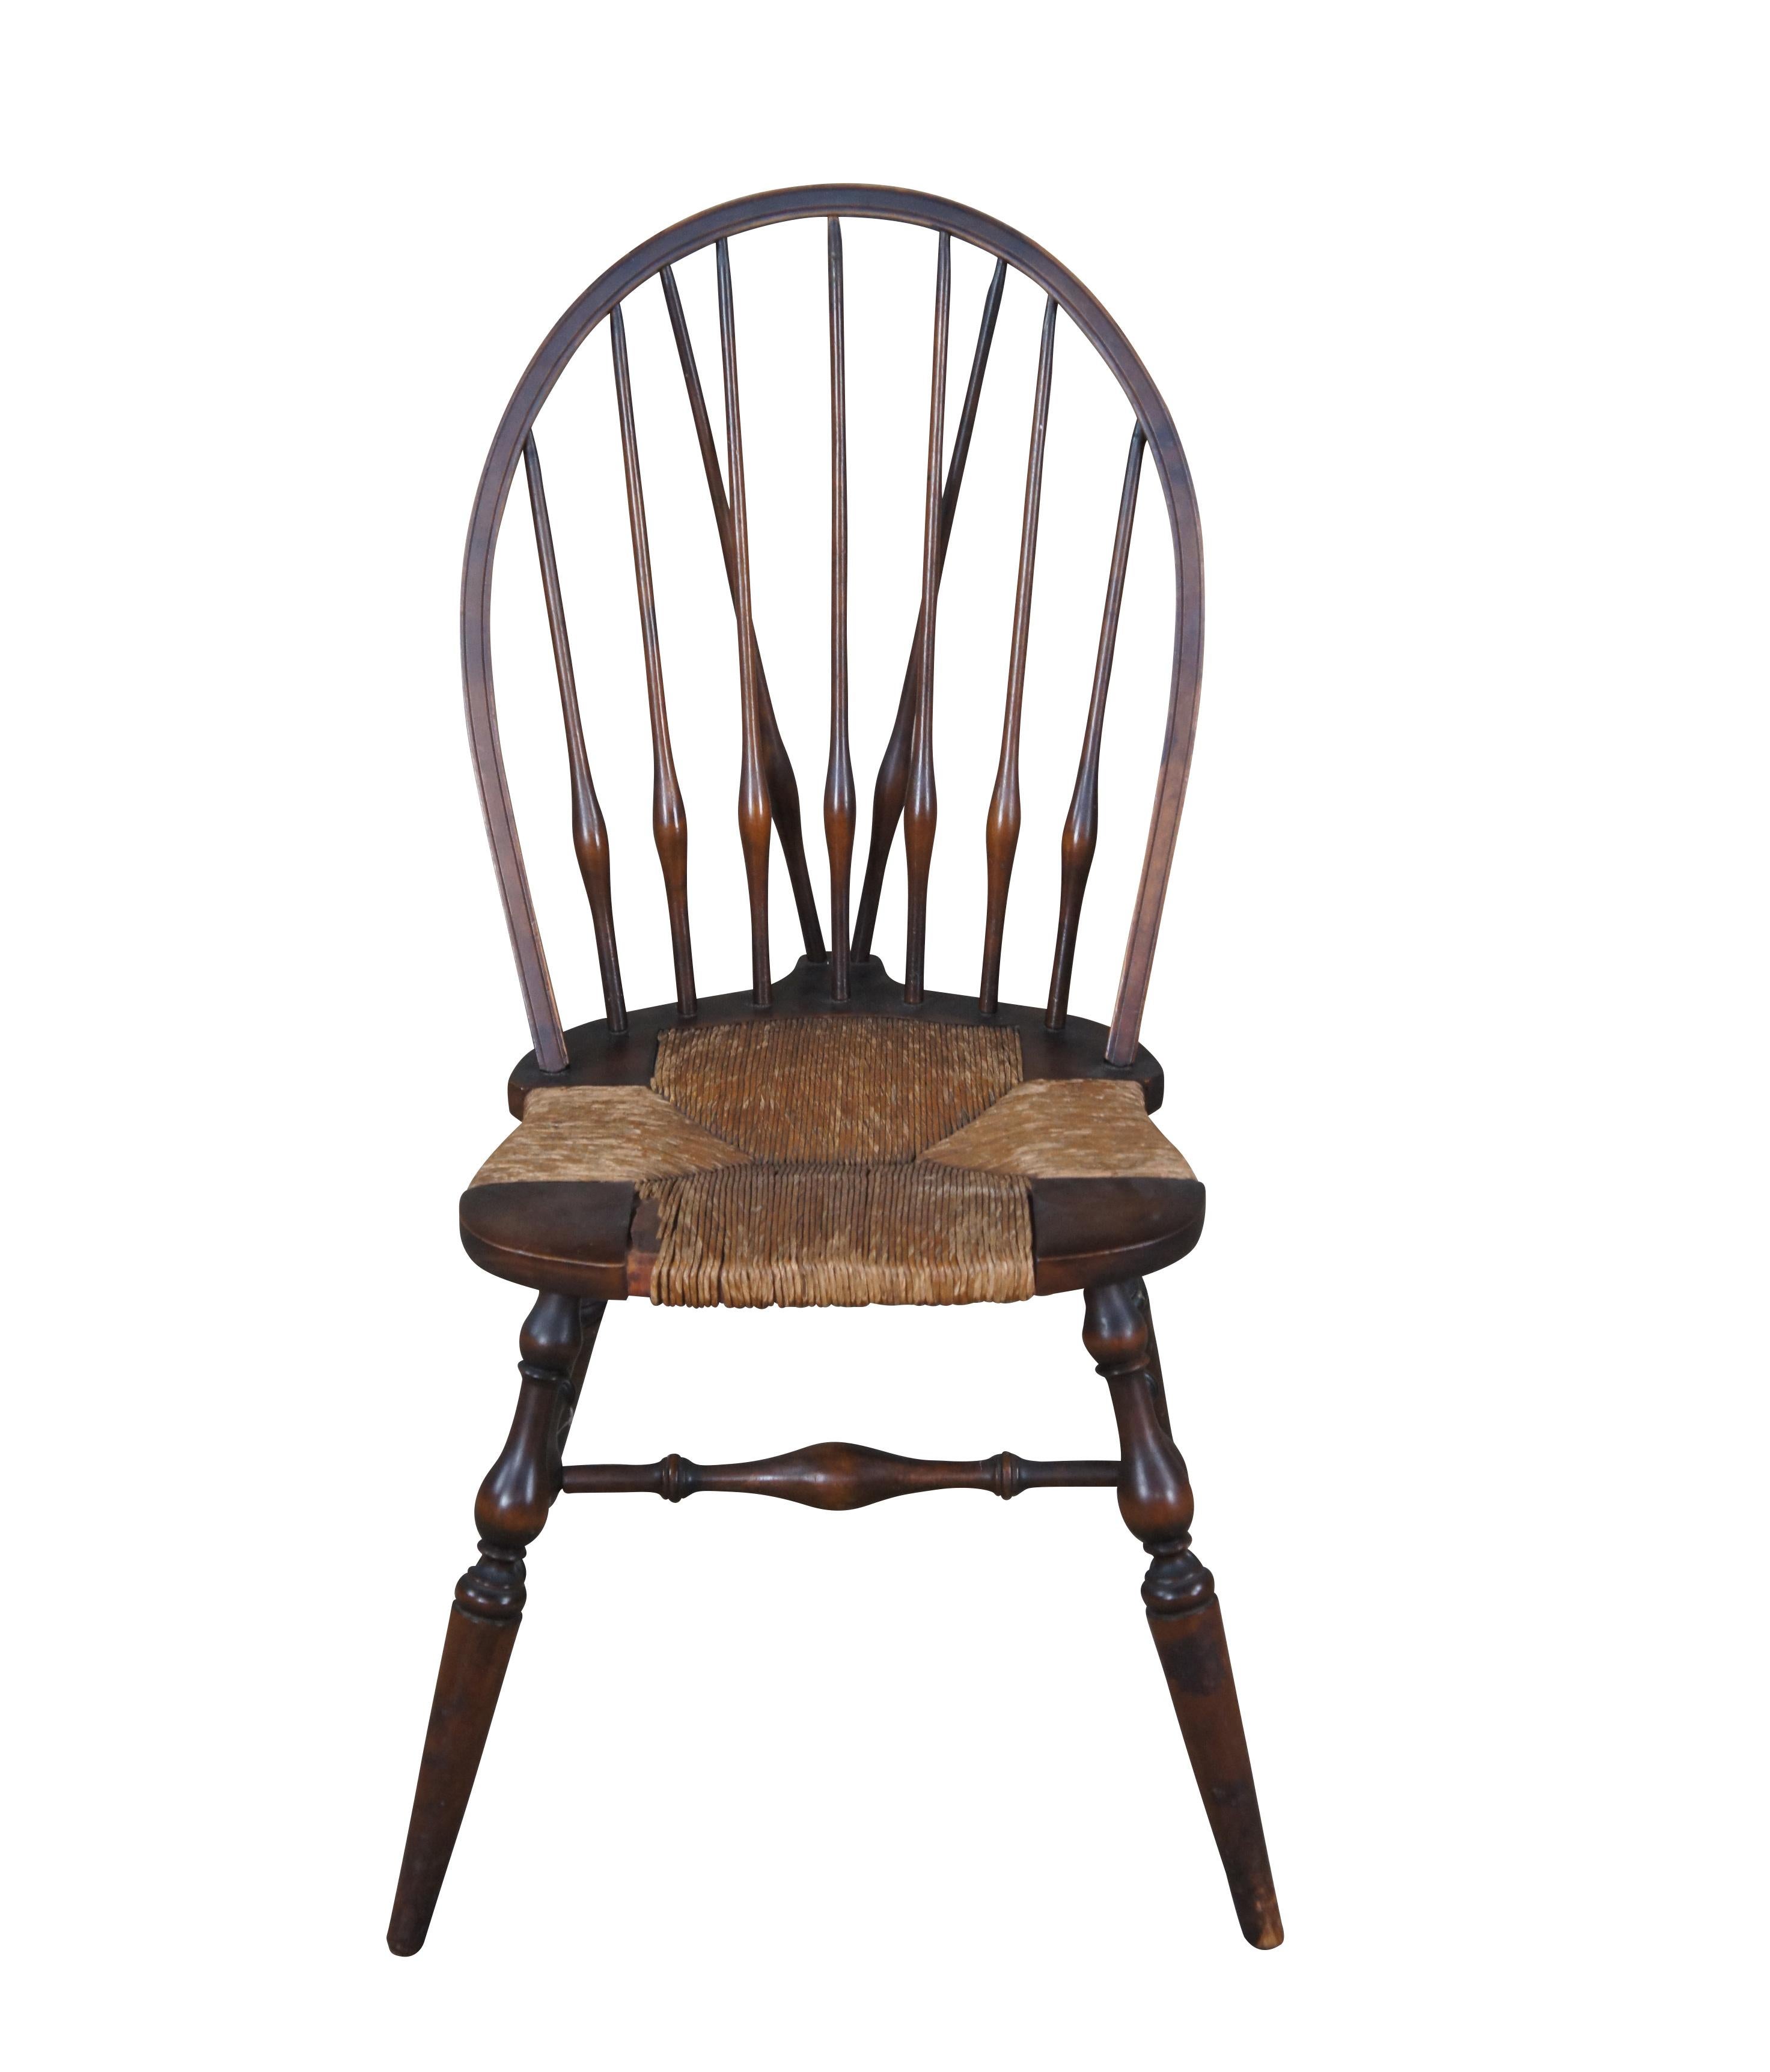 Rare antique Lord & Taylor Windsor farmhouse chair featuring a bentwood slat back with rush seat and turned supports.

Lord & Taylor of New York was the oldest surviving brick-and-mortar department store chain in the United States. In business